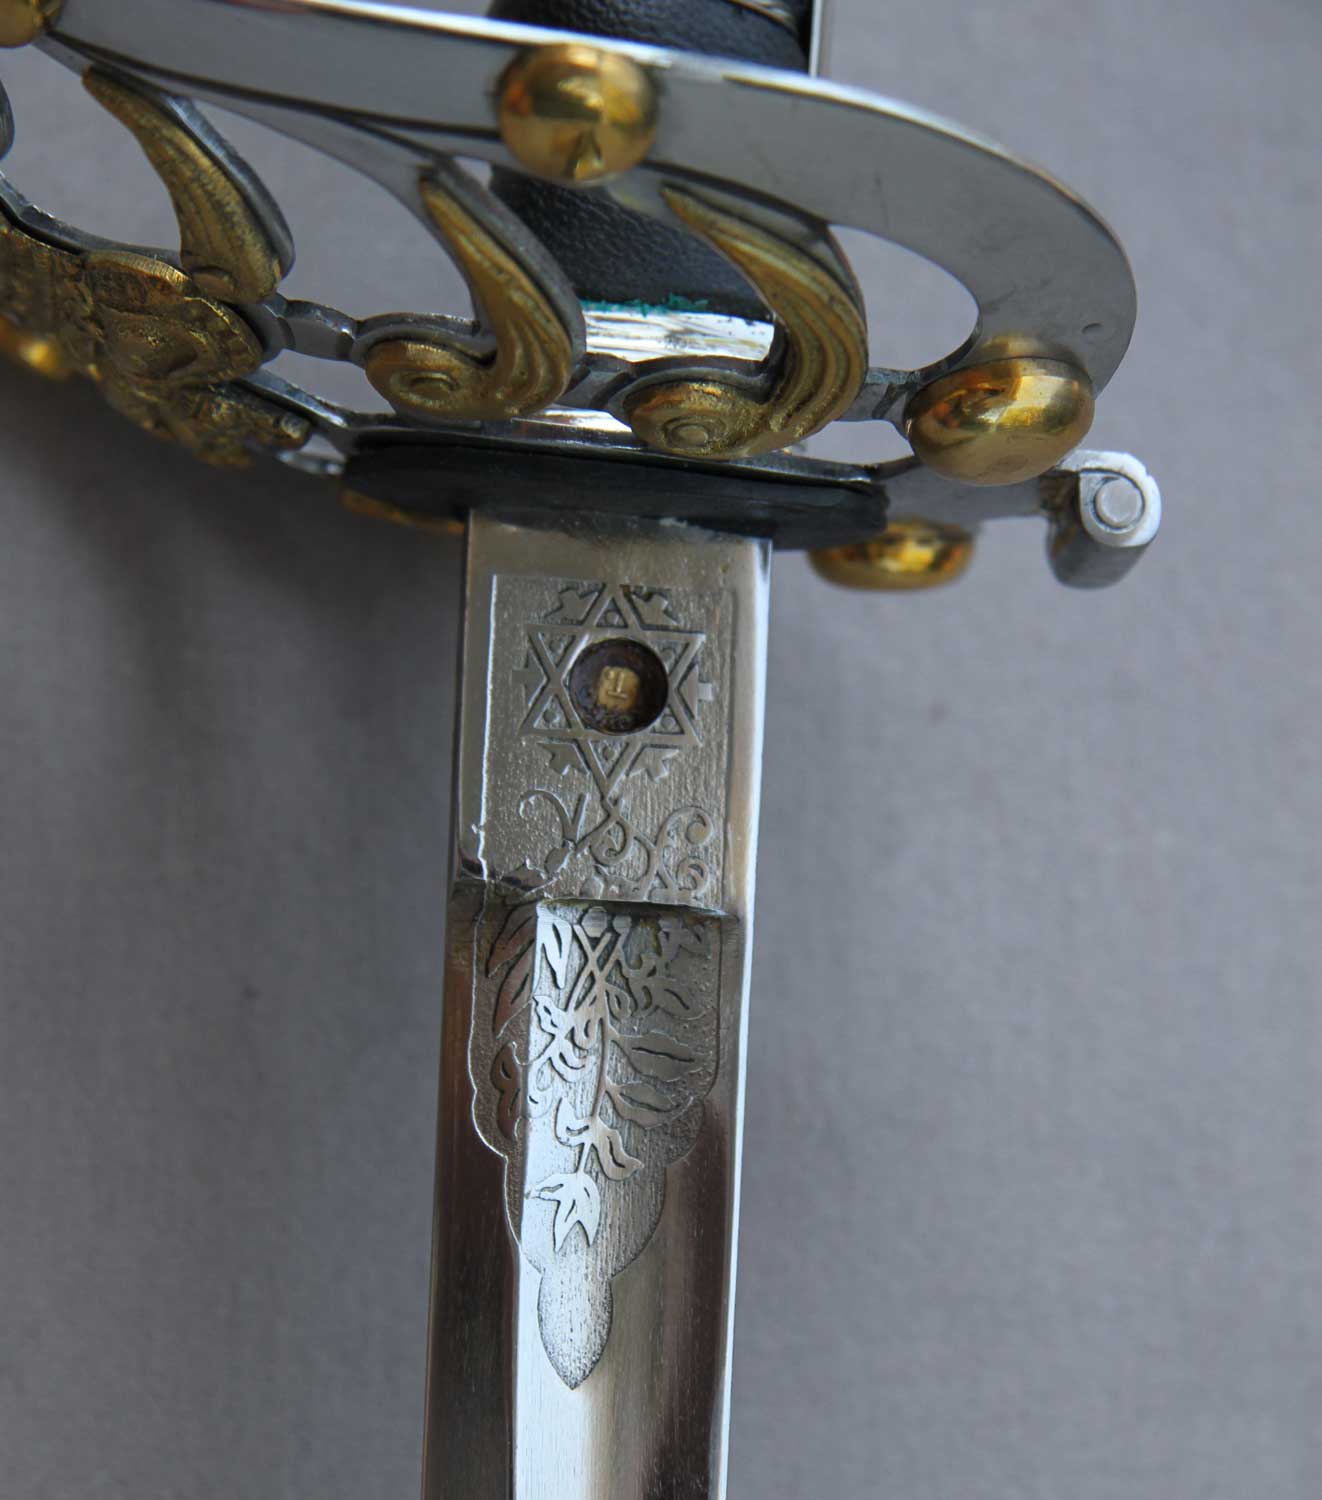 British, Life Guards Officer's Sword, 1865 Pattern